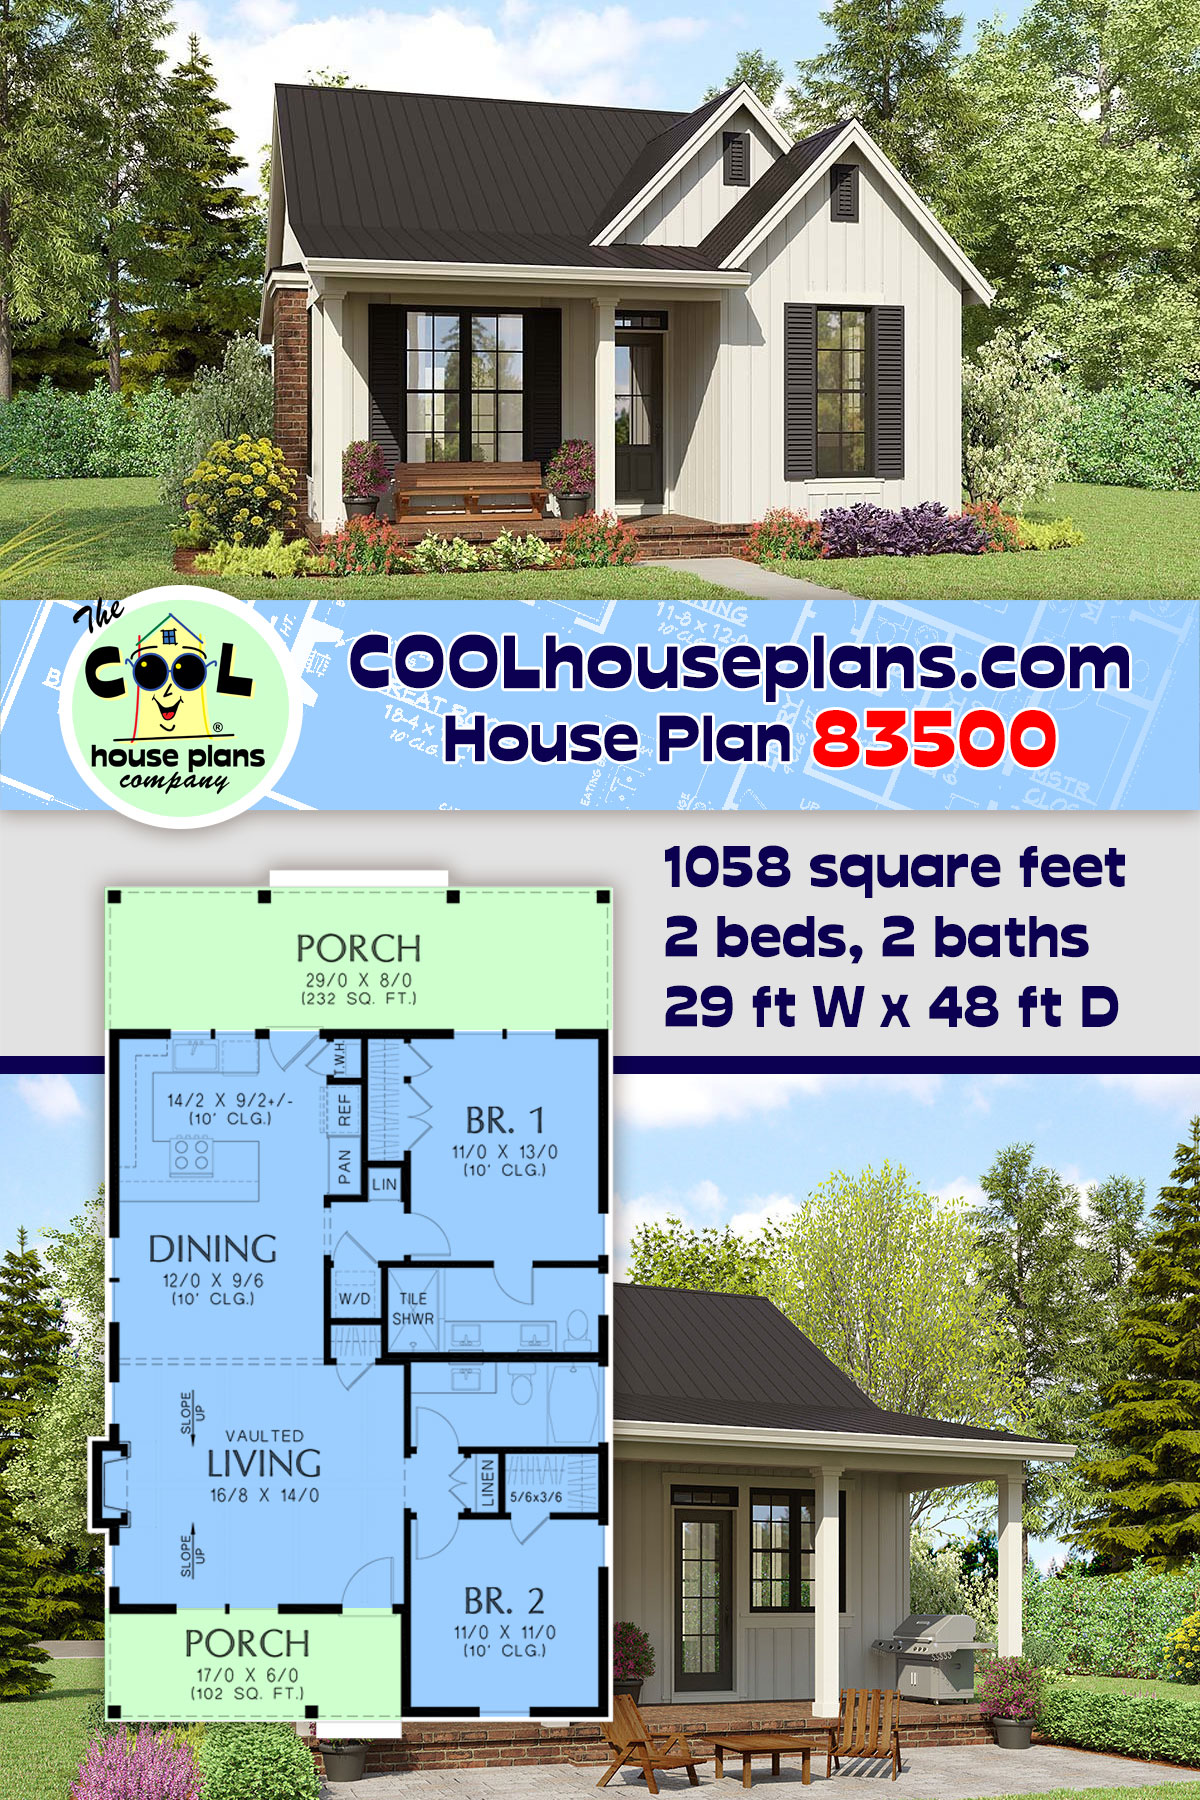 Cottage, Country, Farmhouse House Plan 83500 with 2 Beds, 2 Baths